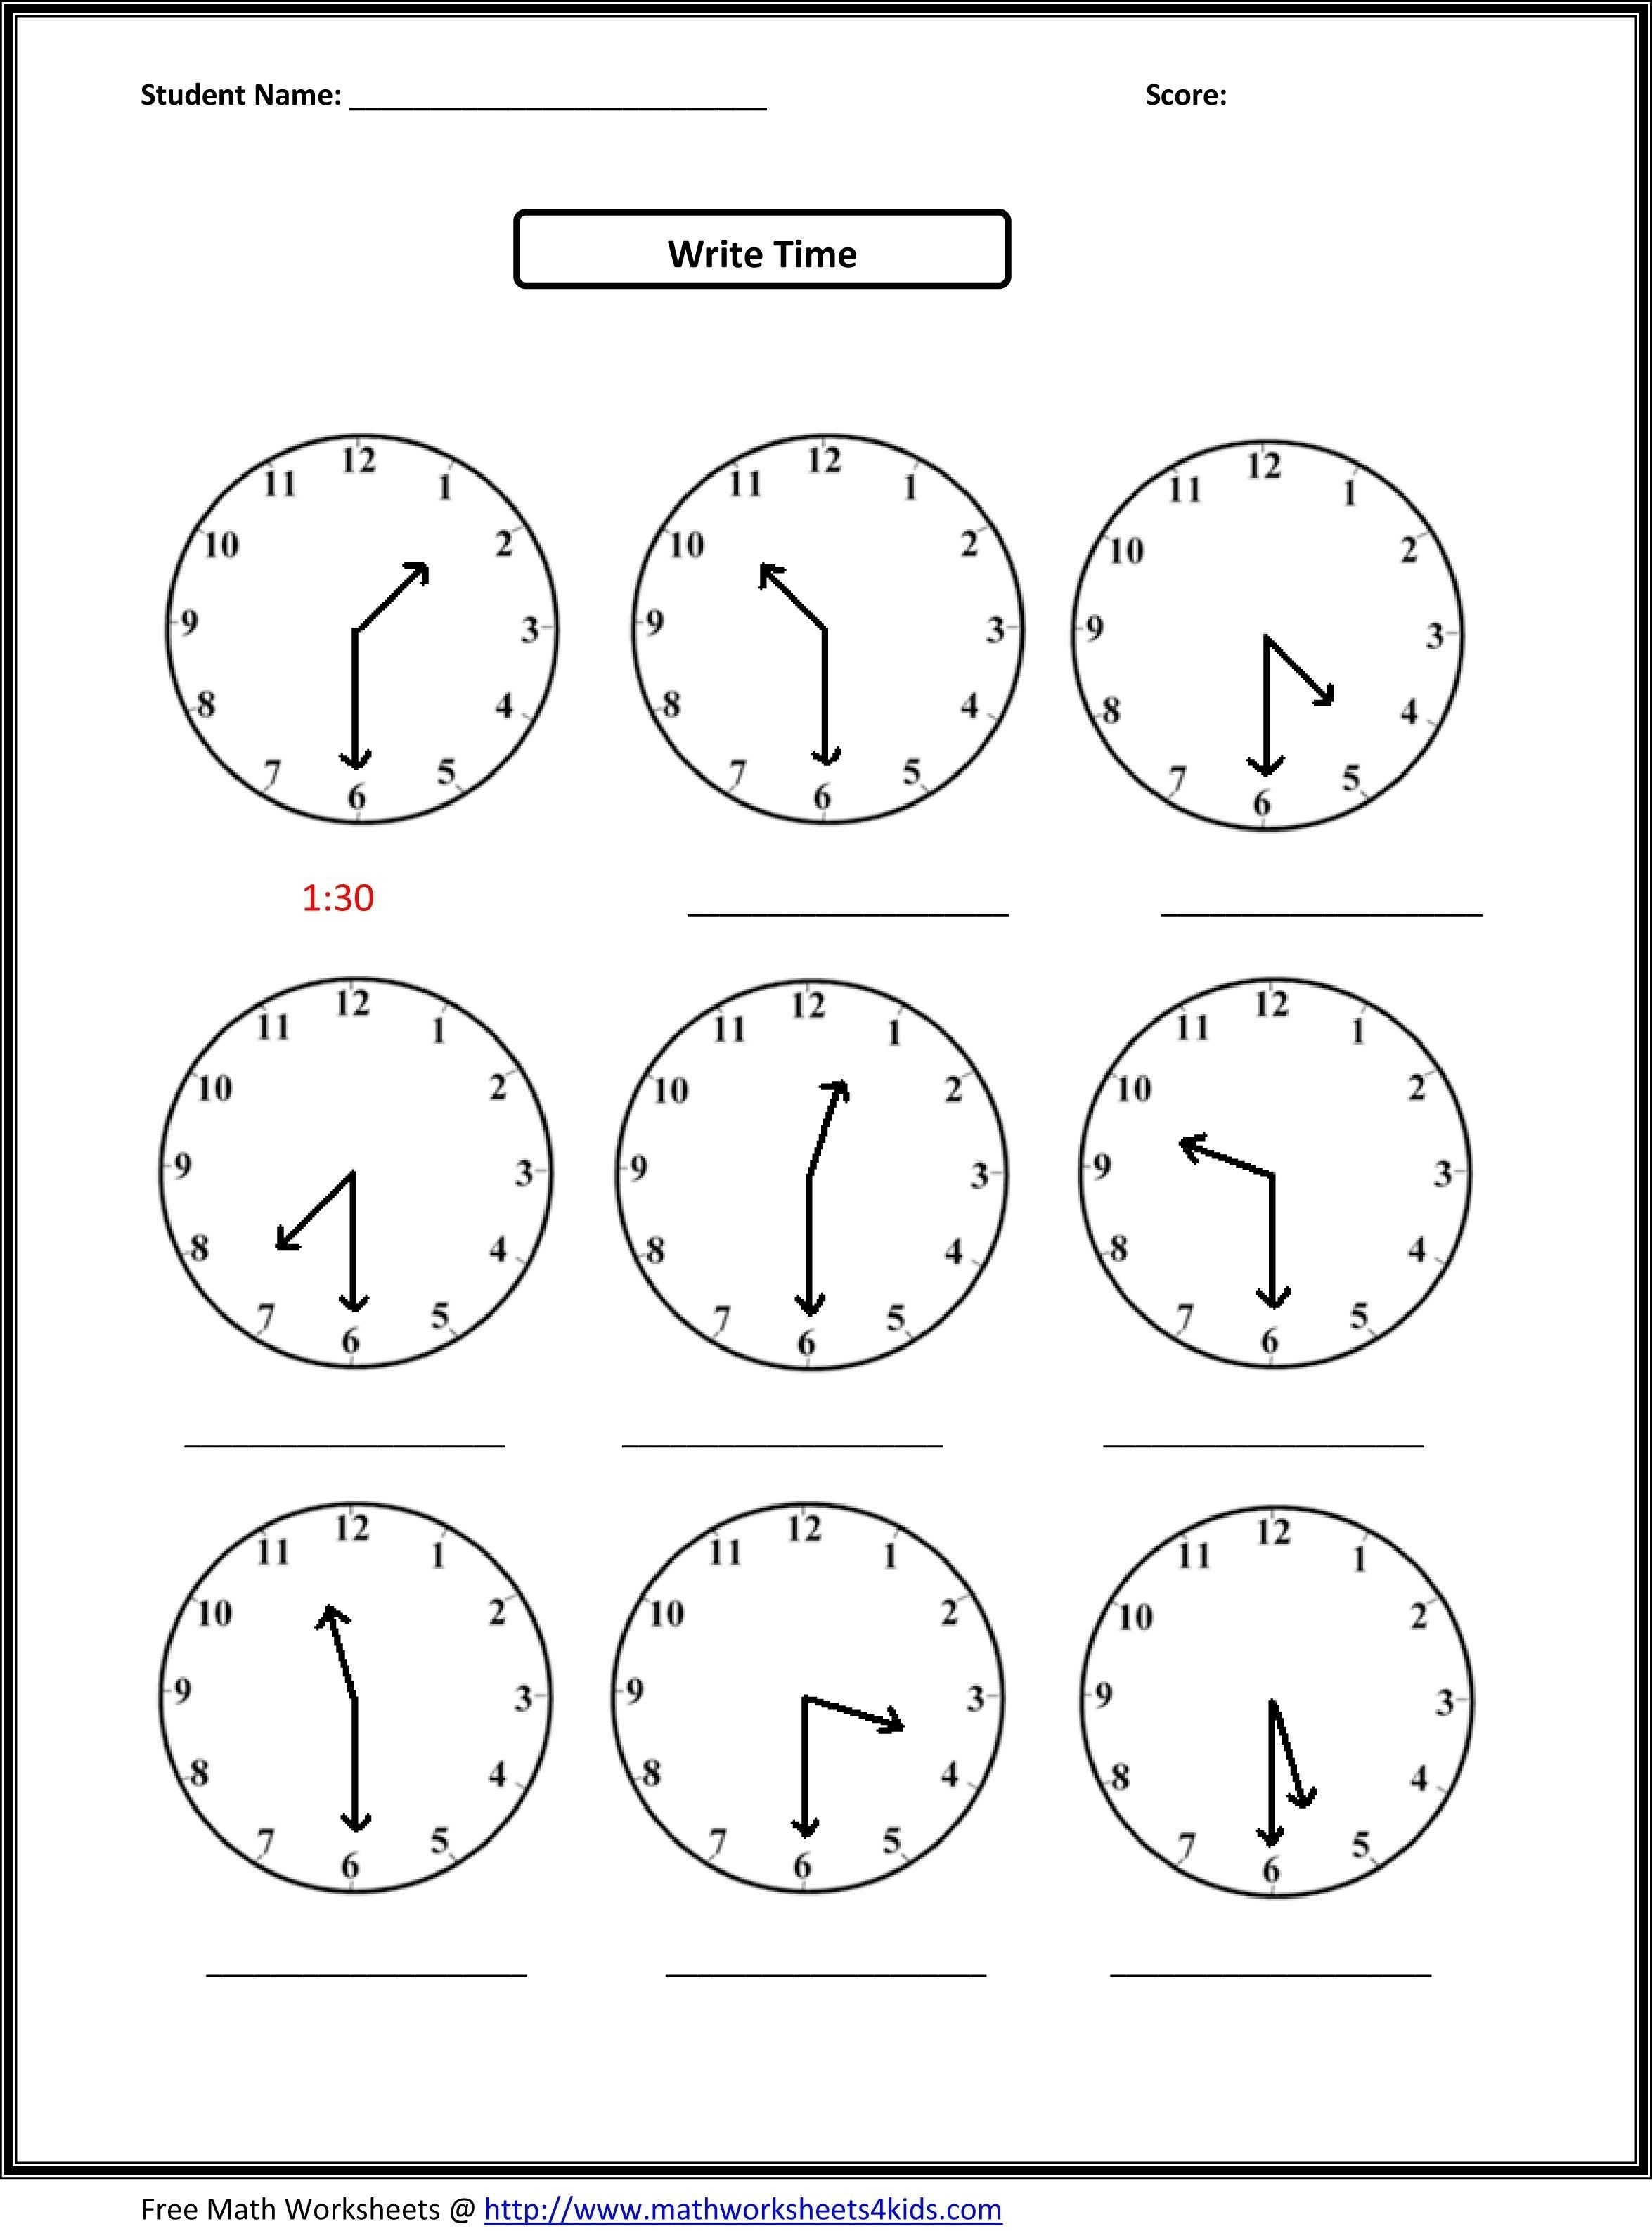 √ Telling Time Printable Worksheets First Grade Inspirationa - Free Printable Telling Time Worksheets For 1St Grade